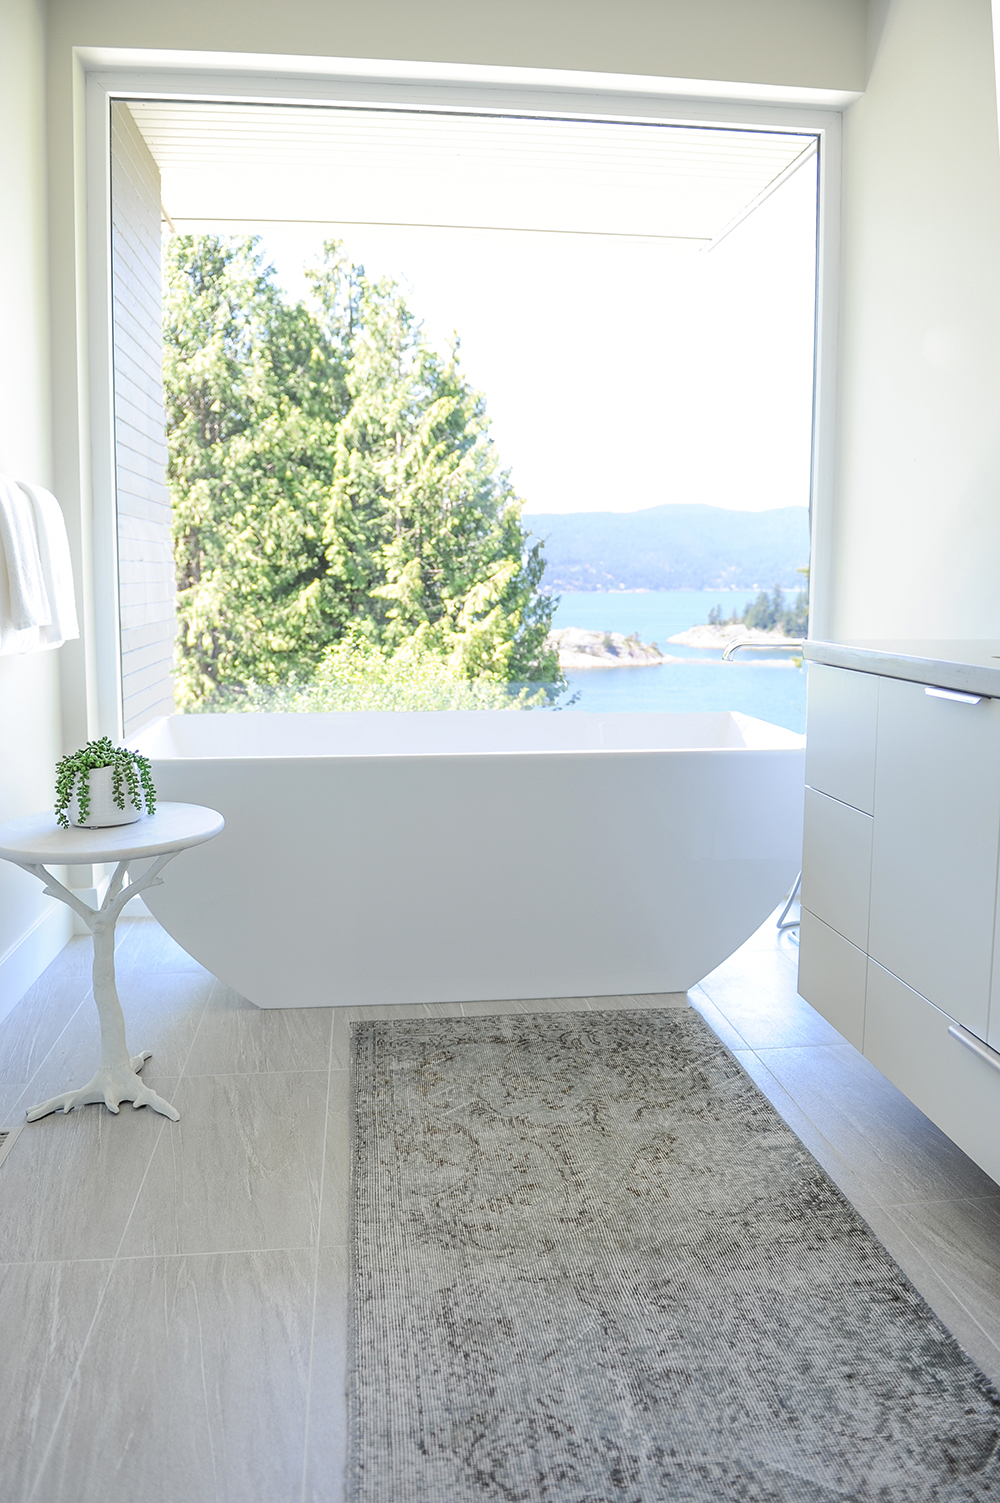 This show-stopping master ensuite features a sleek vessel tub.